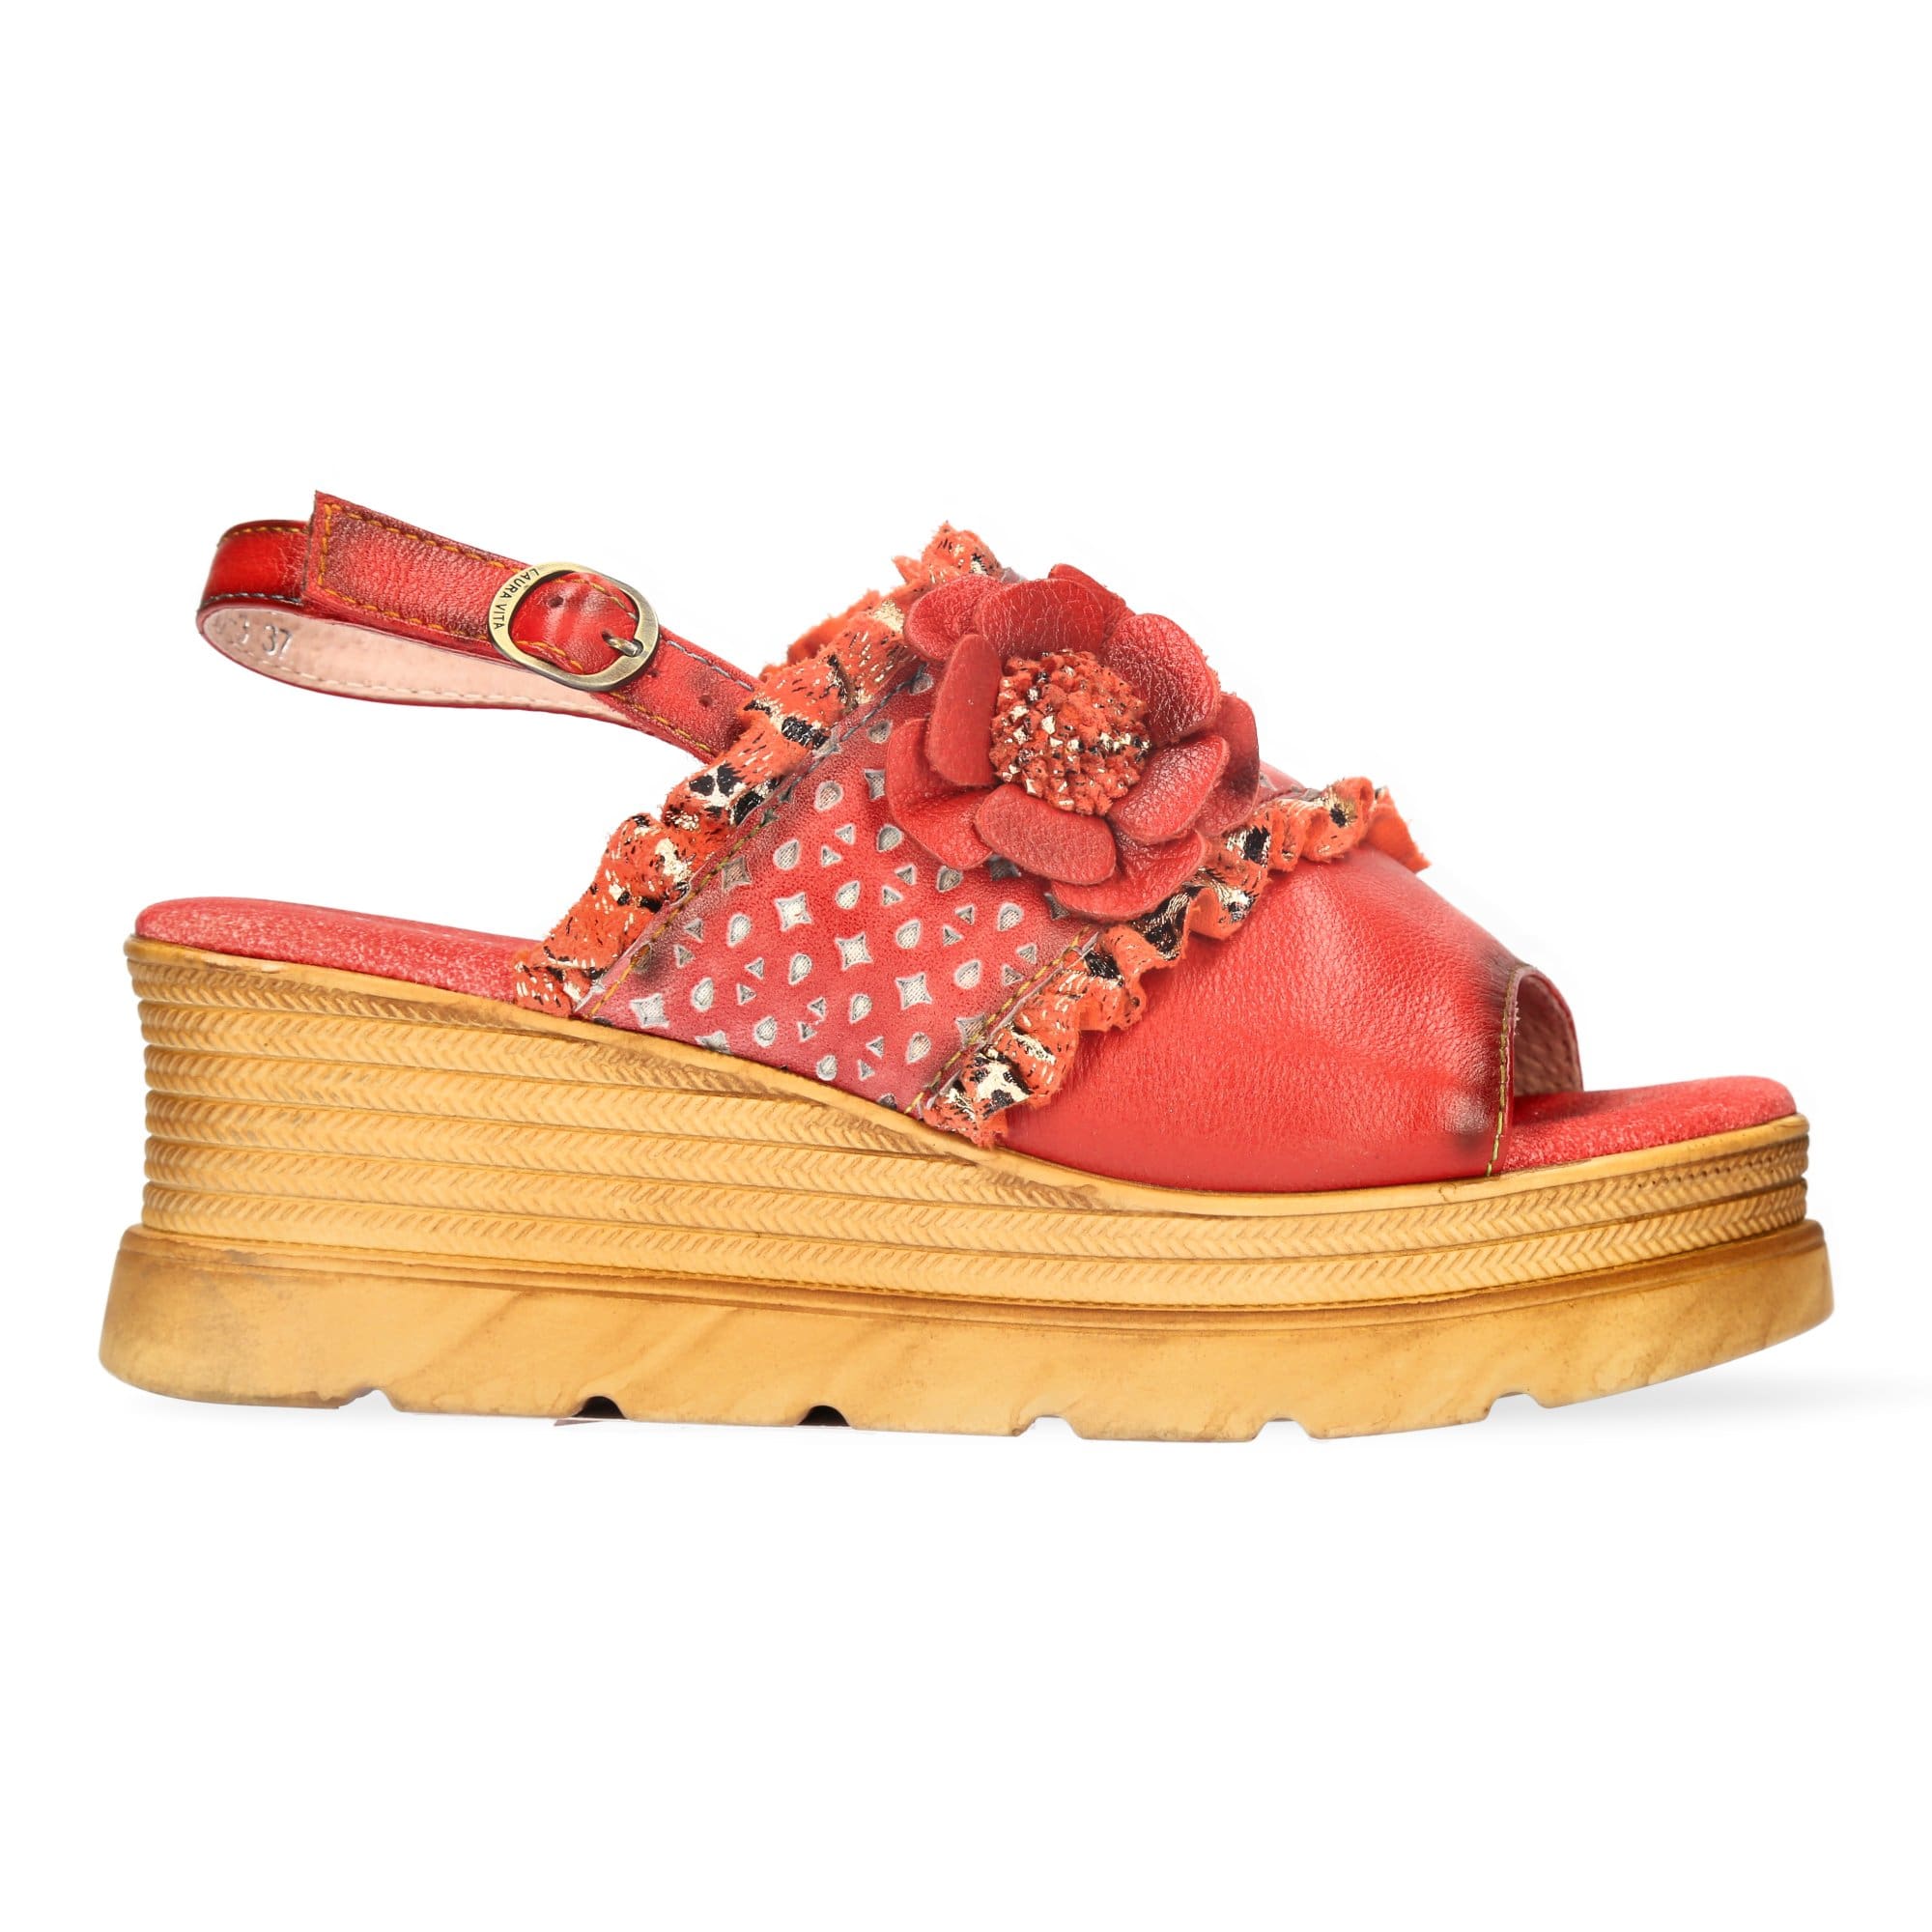 Chaussures JACASSEO 03 - 35 / Rouge - Sandale